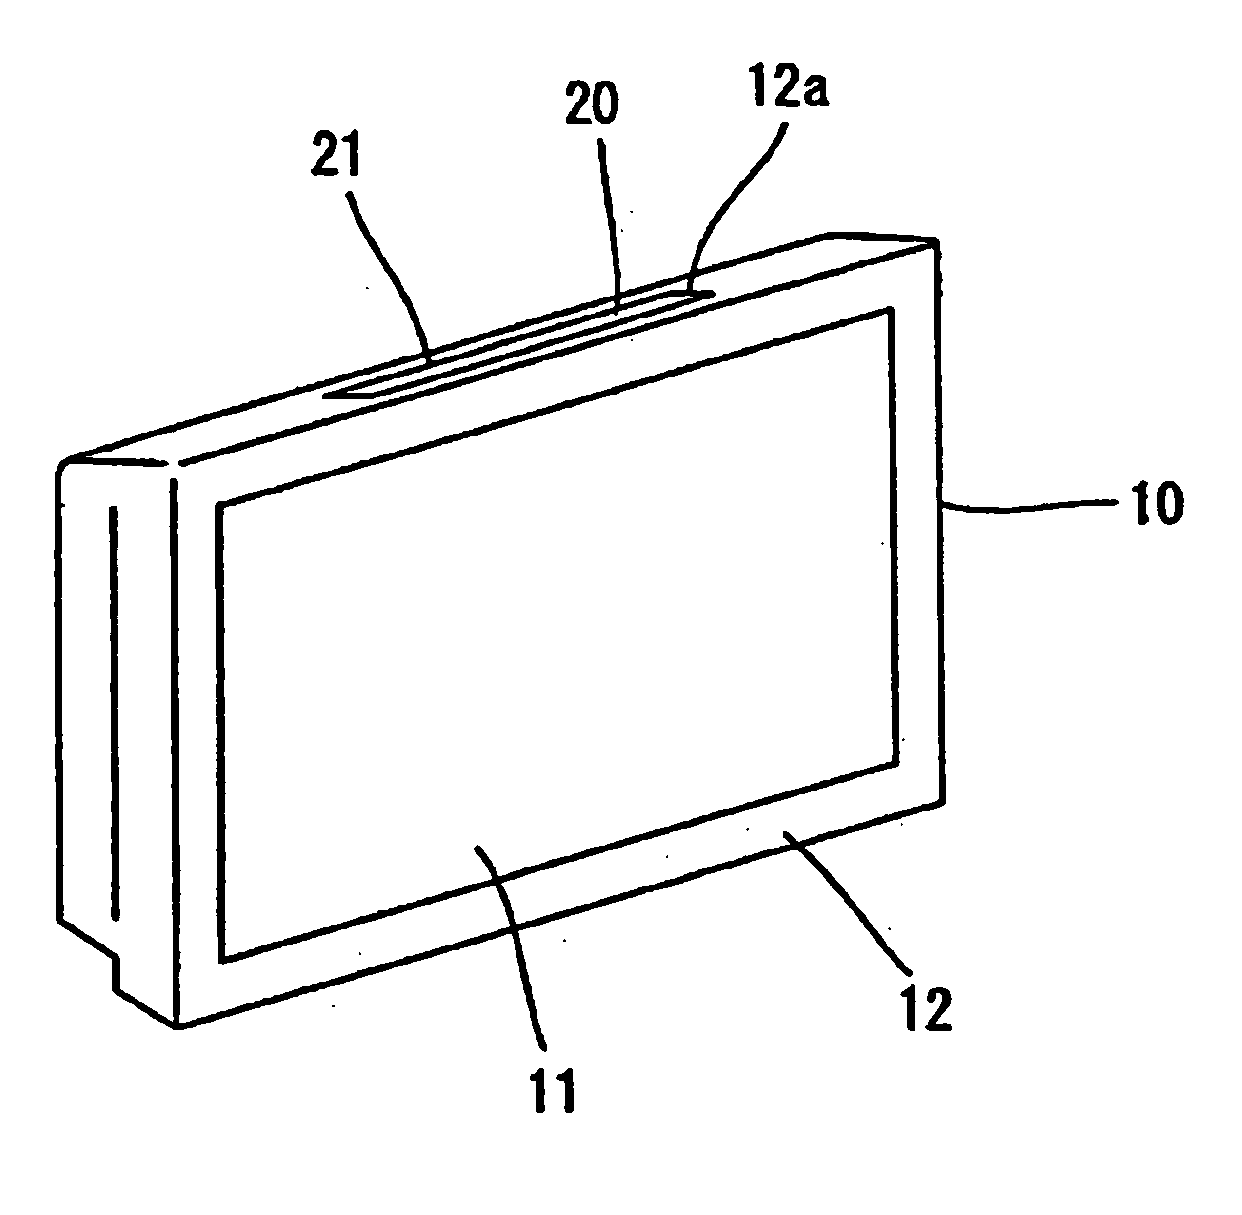 Television with a disk playback feature and disk playback apparatus